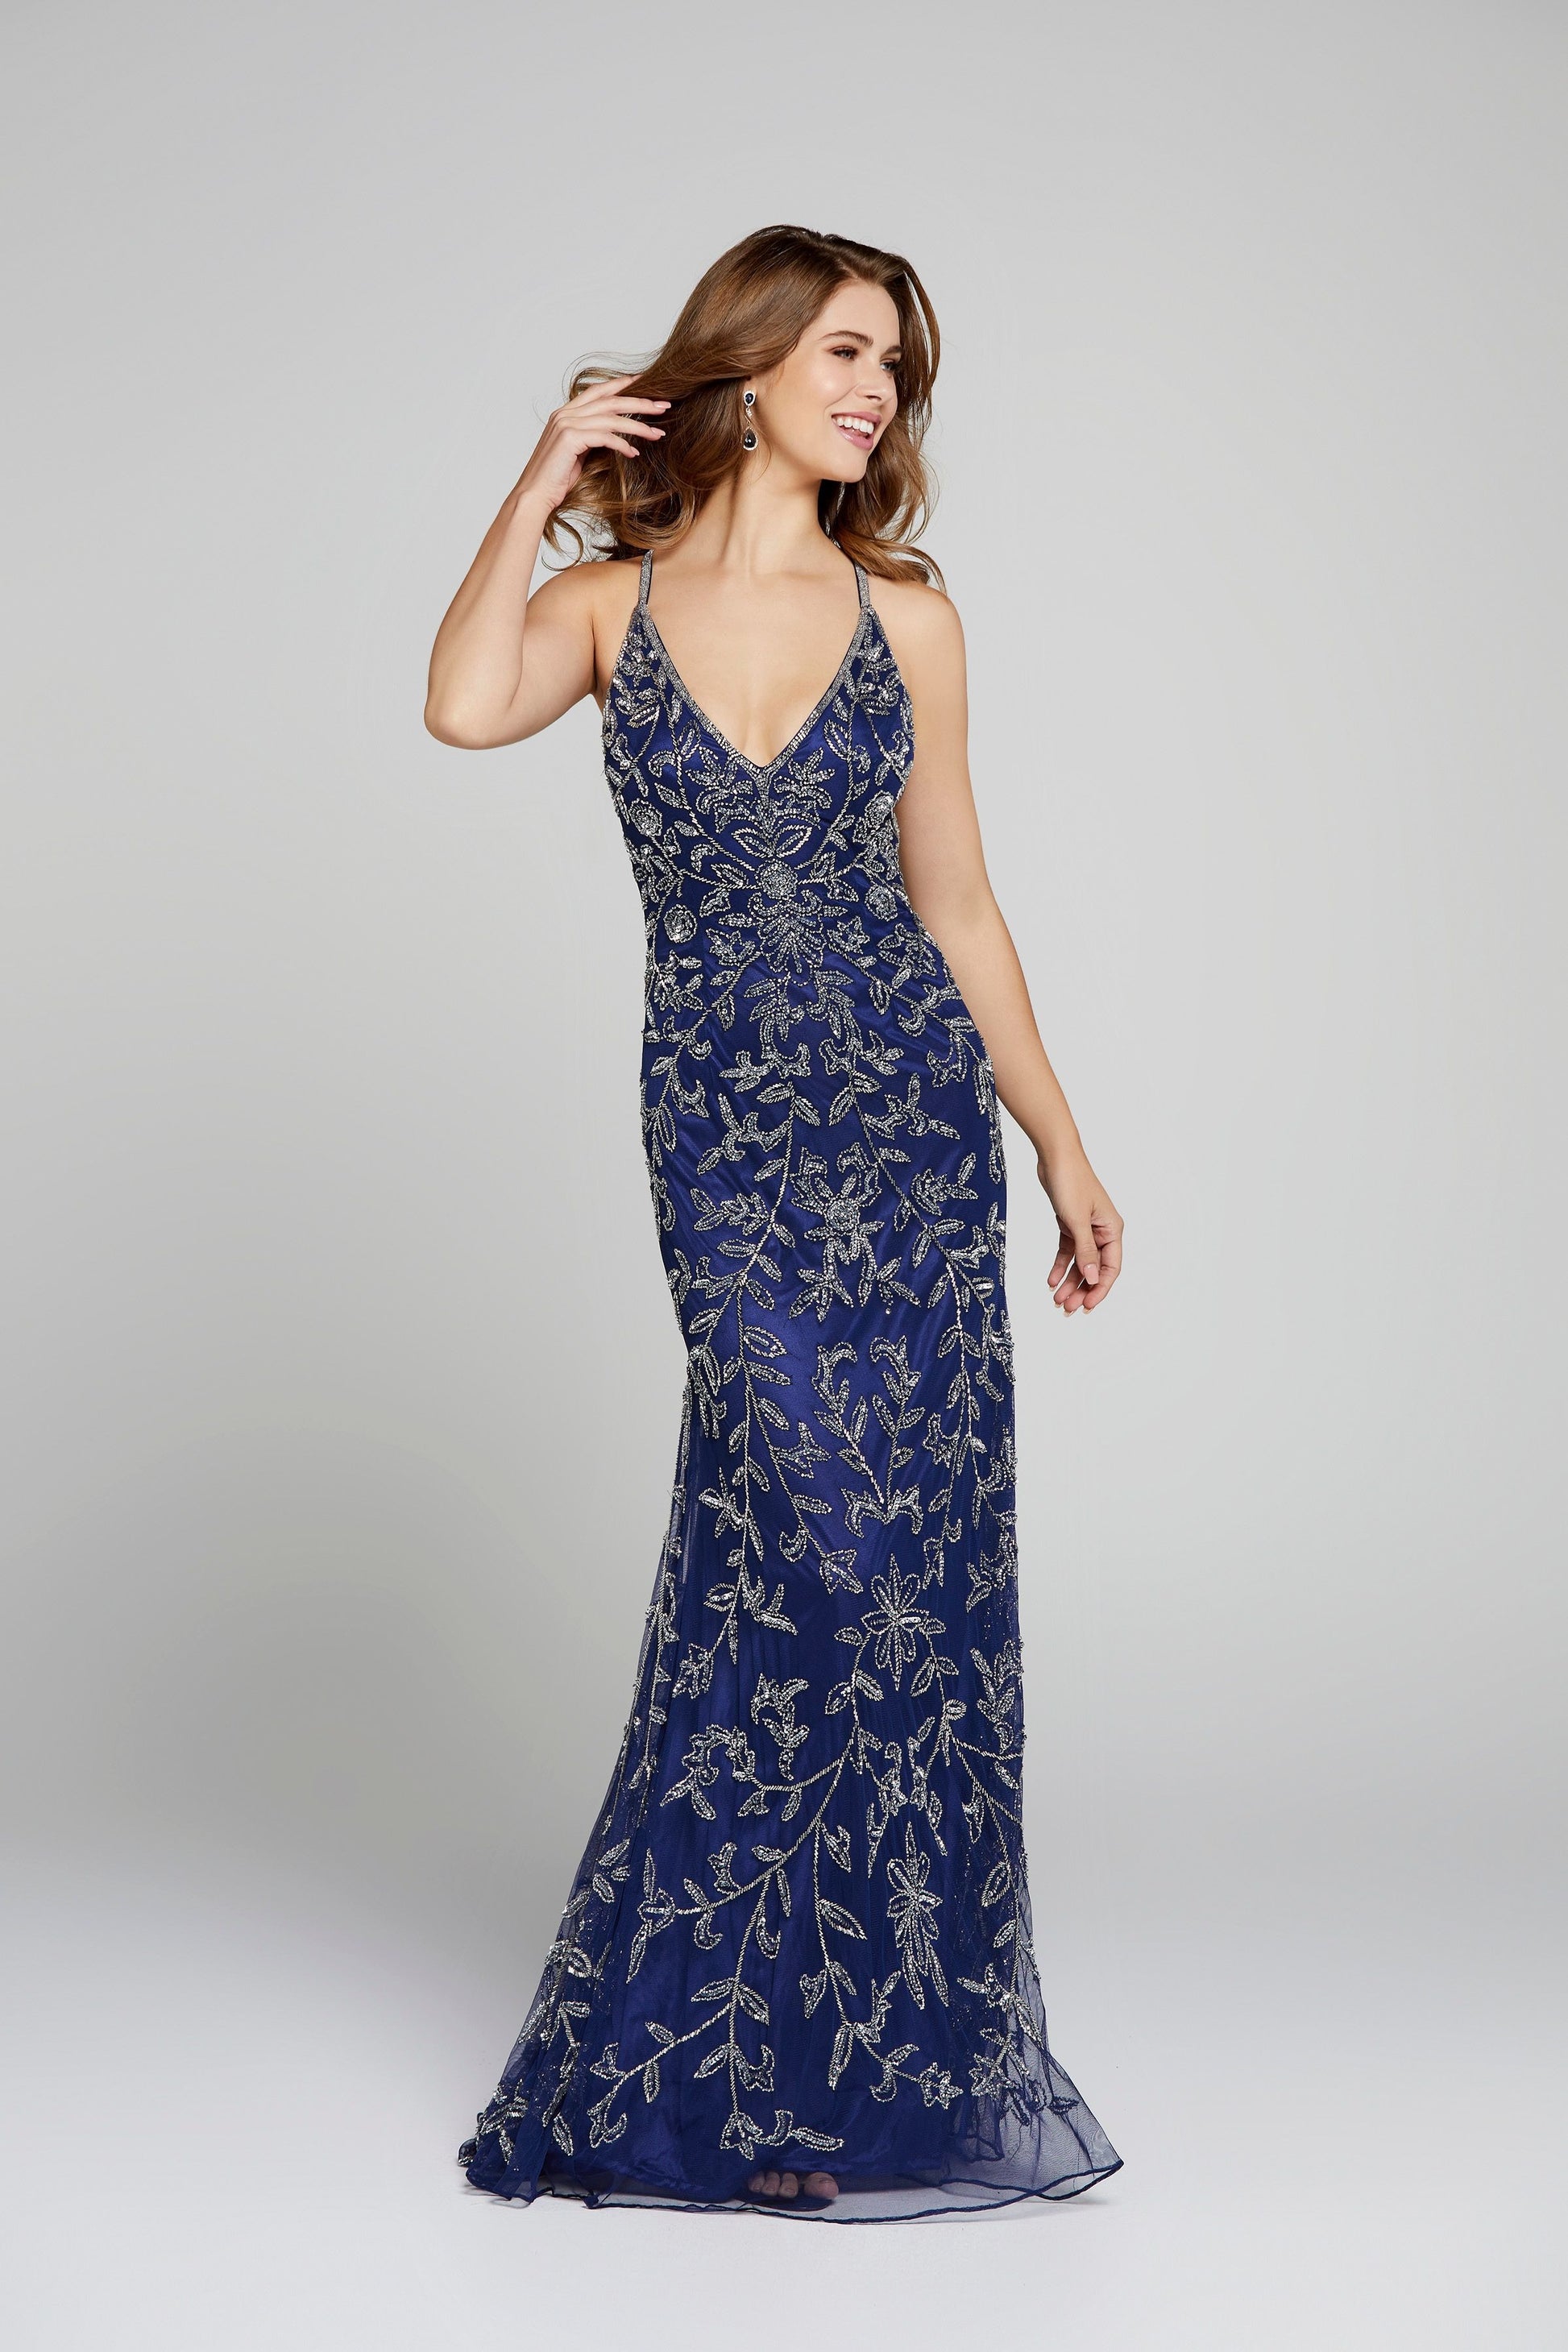 Primavera Couture 3414 is a long sequin beaded Prom Dress, Pageant Gown & Formal Evening Wear gown. This v neckline beaded evening gown Features criss cross straps in the open back. and small train. Midnight blue front full view